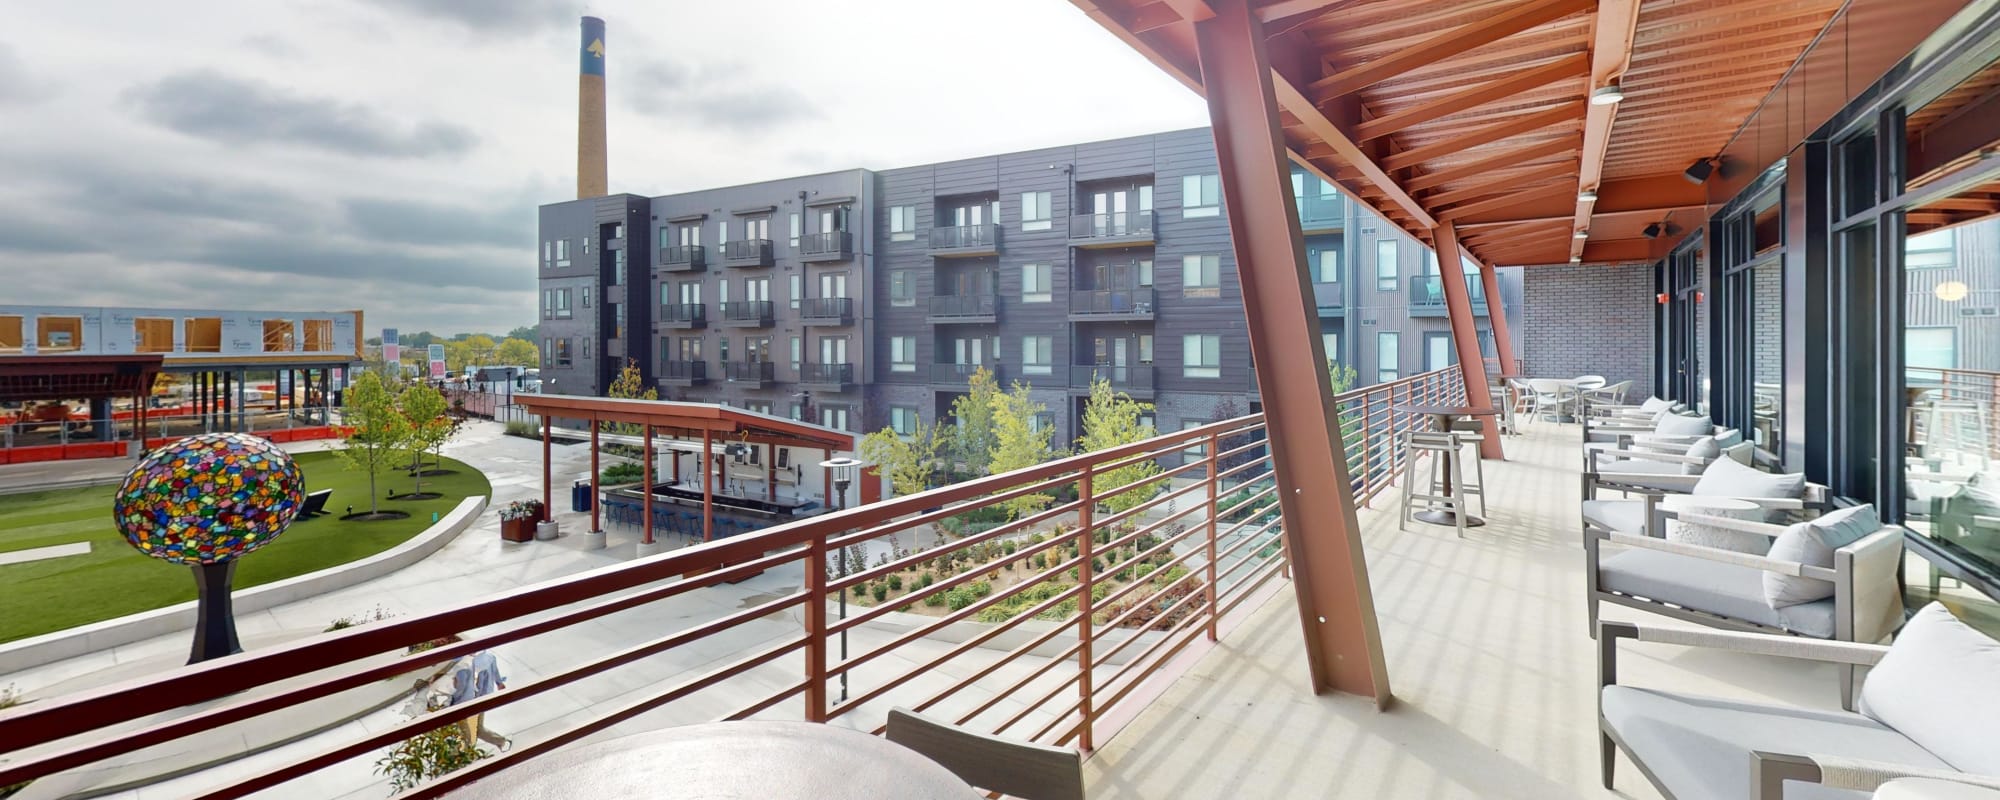 Leasing Office Balcony overlooking Central Green Park and One-Eyed Jacks Patio Bar at Factory 52 Apartments in Norwood, OH